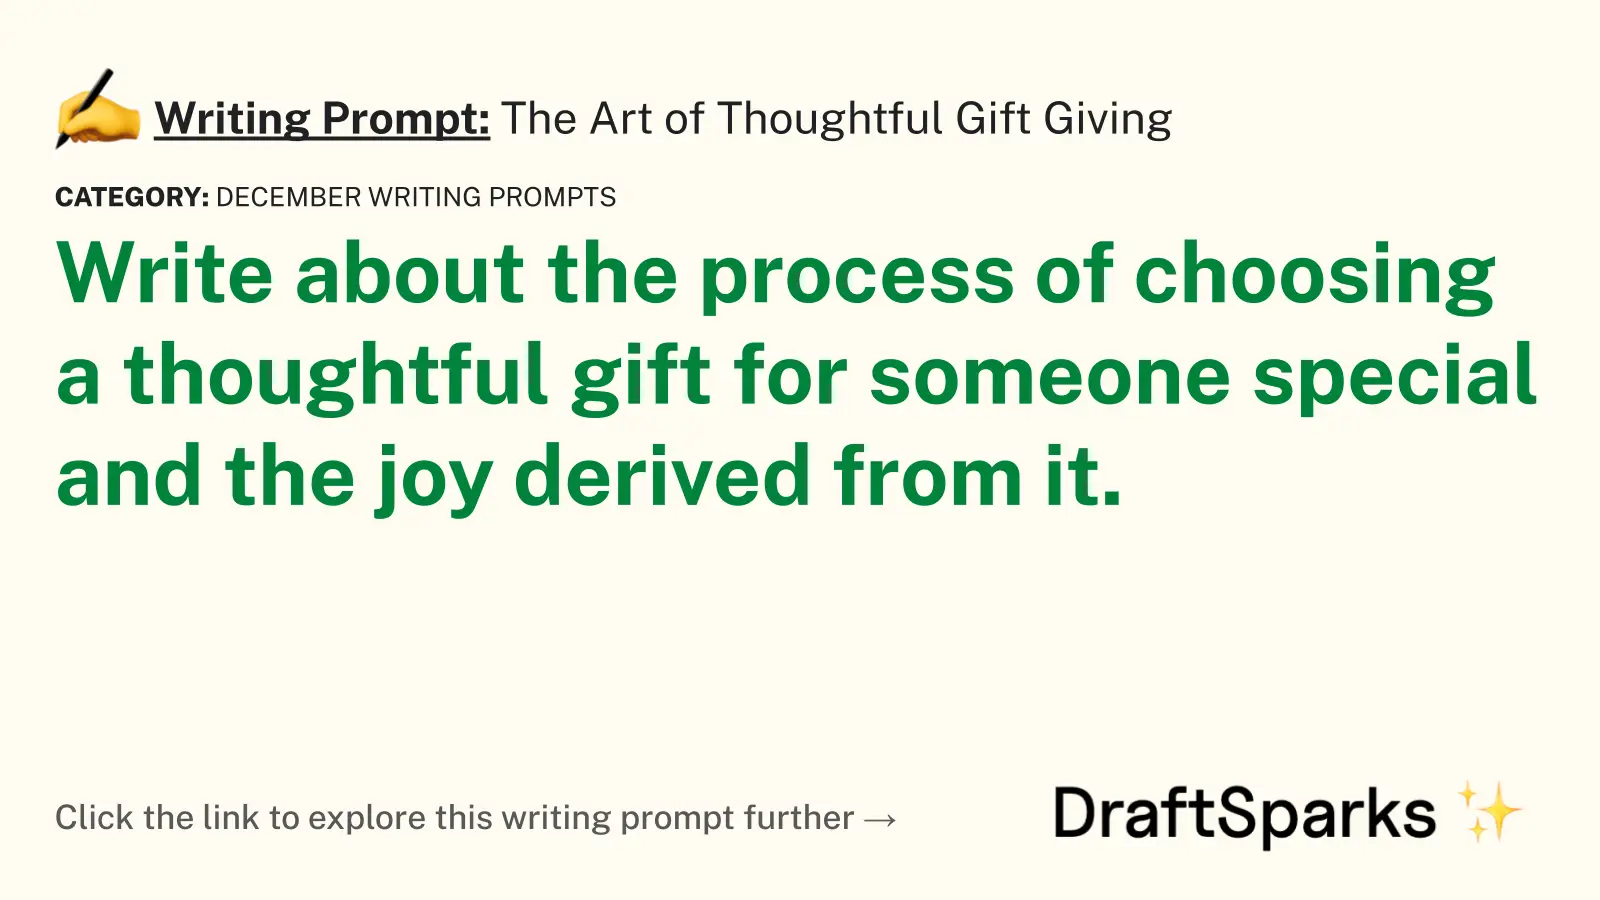 The Art of Thoughtful Gift Giving